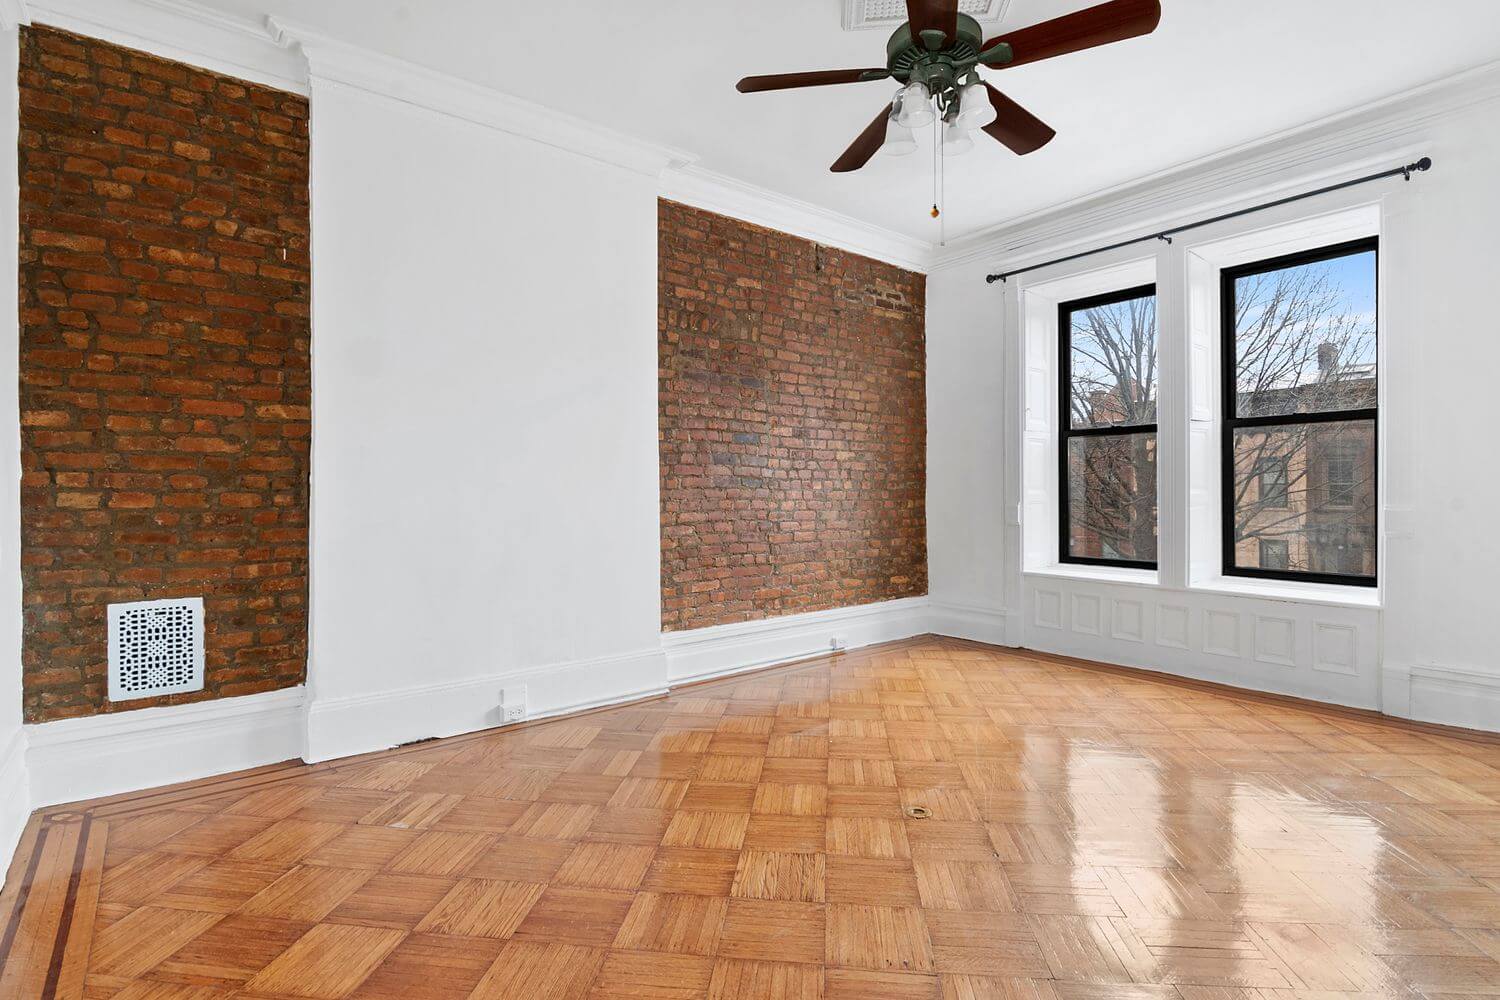 Bed Stuy Brownstone Apartment With Mantel, Clawfoot Tub, Marble Sink Asks $2,700